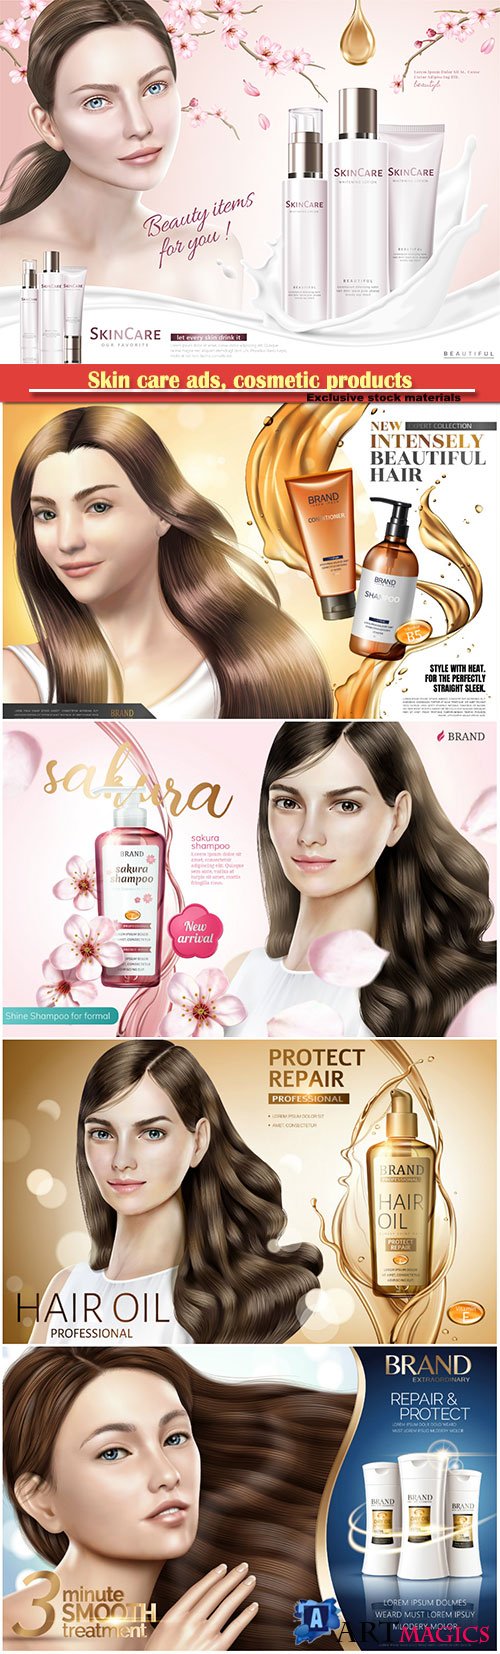 Skin care ads, cosmetic products, hair care product ads in 3d vector illustration